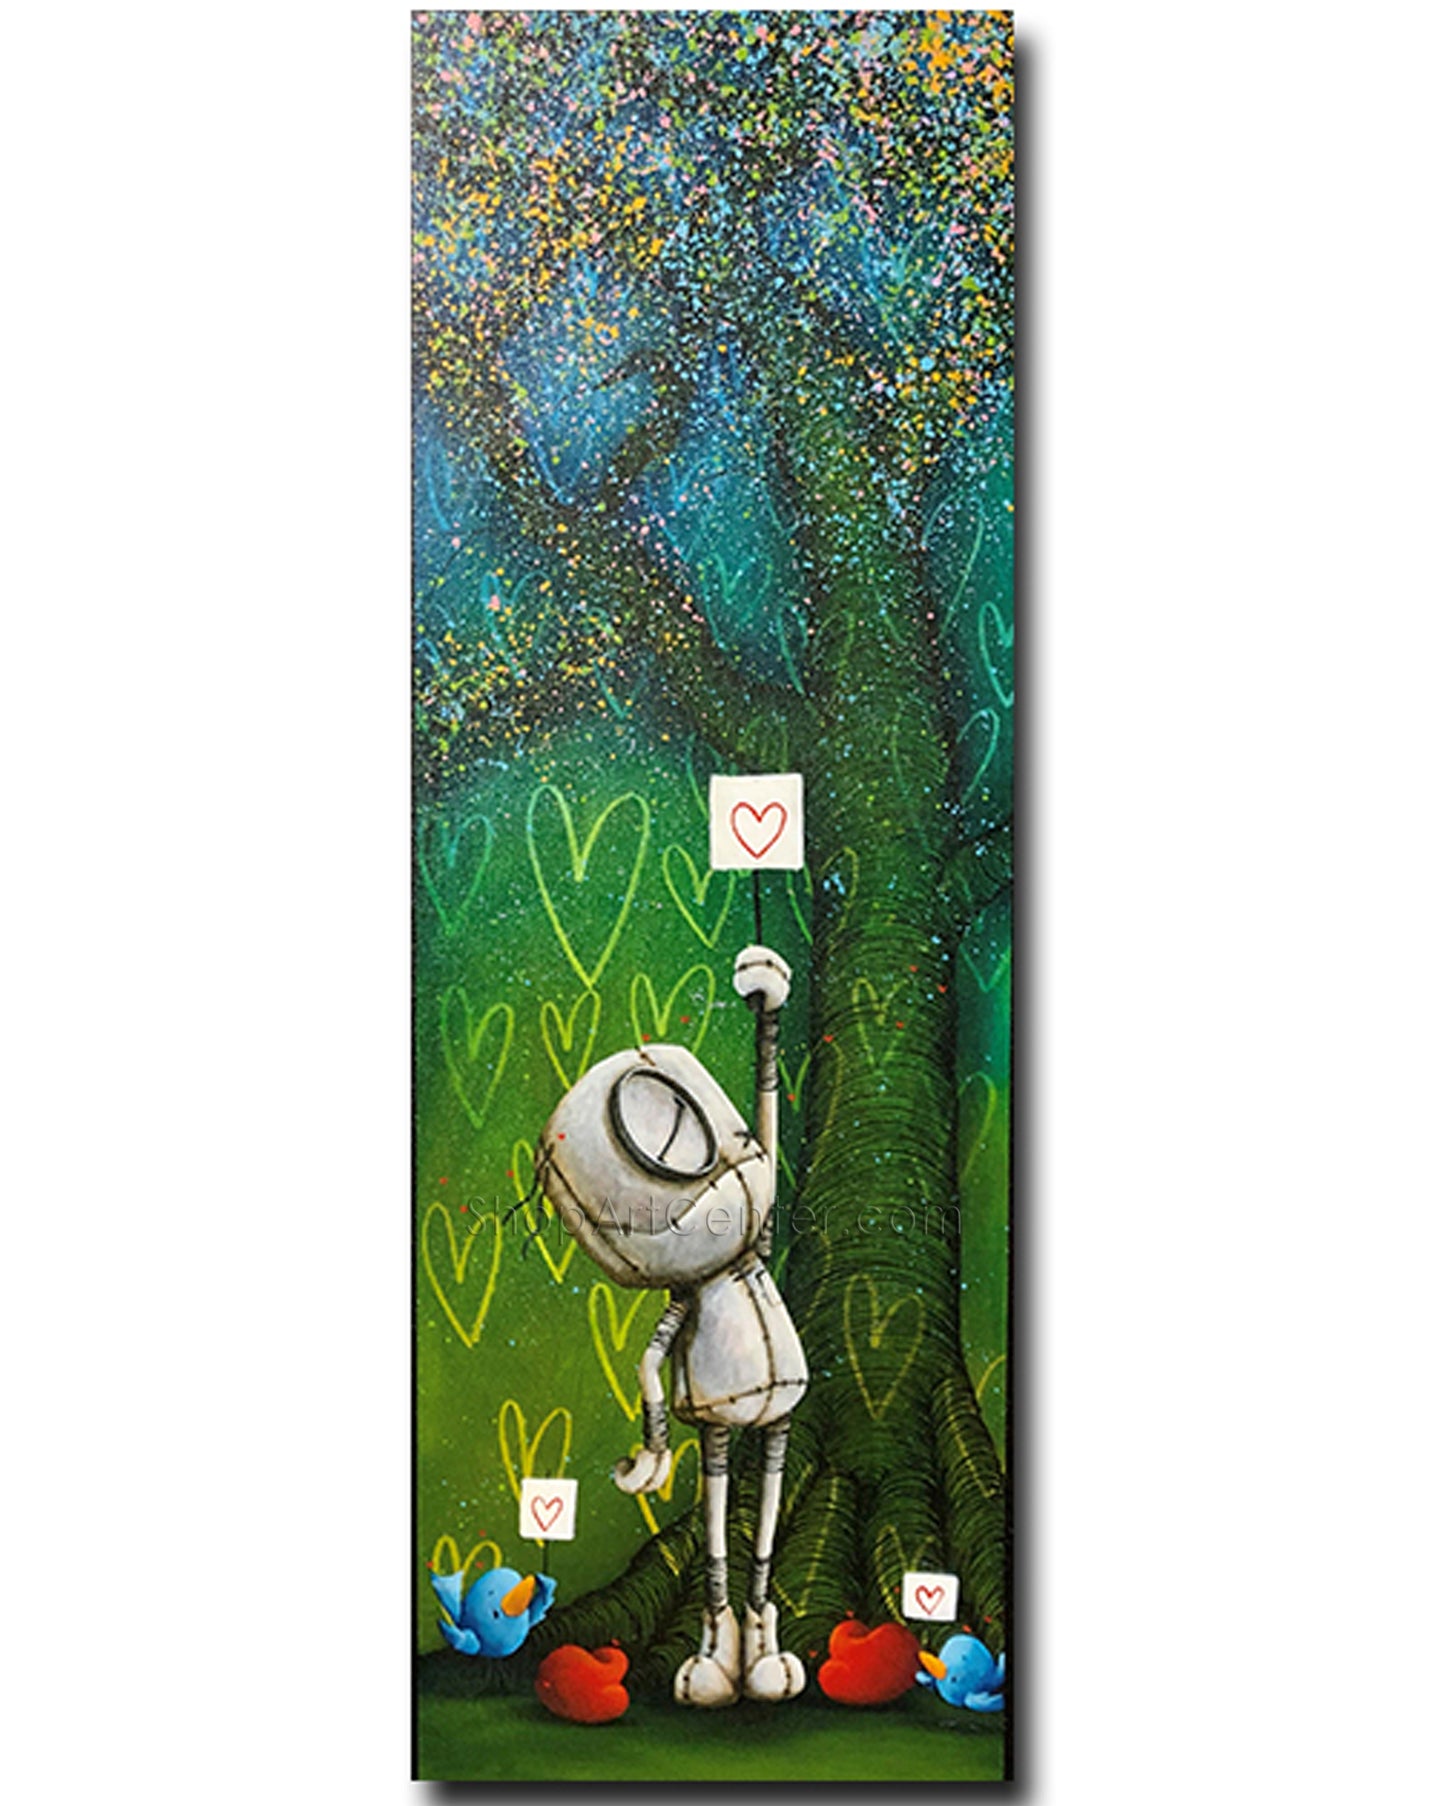 Fabio Napoleoni "If You Don't Stand for Something" Limited Edition Canvas Giclee